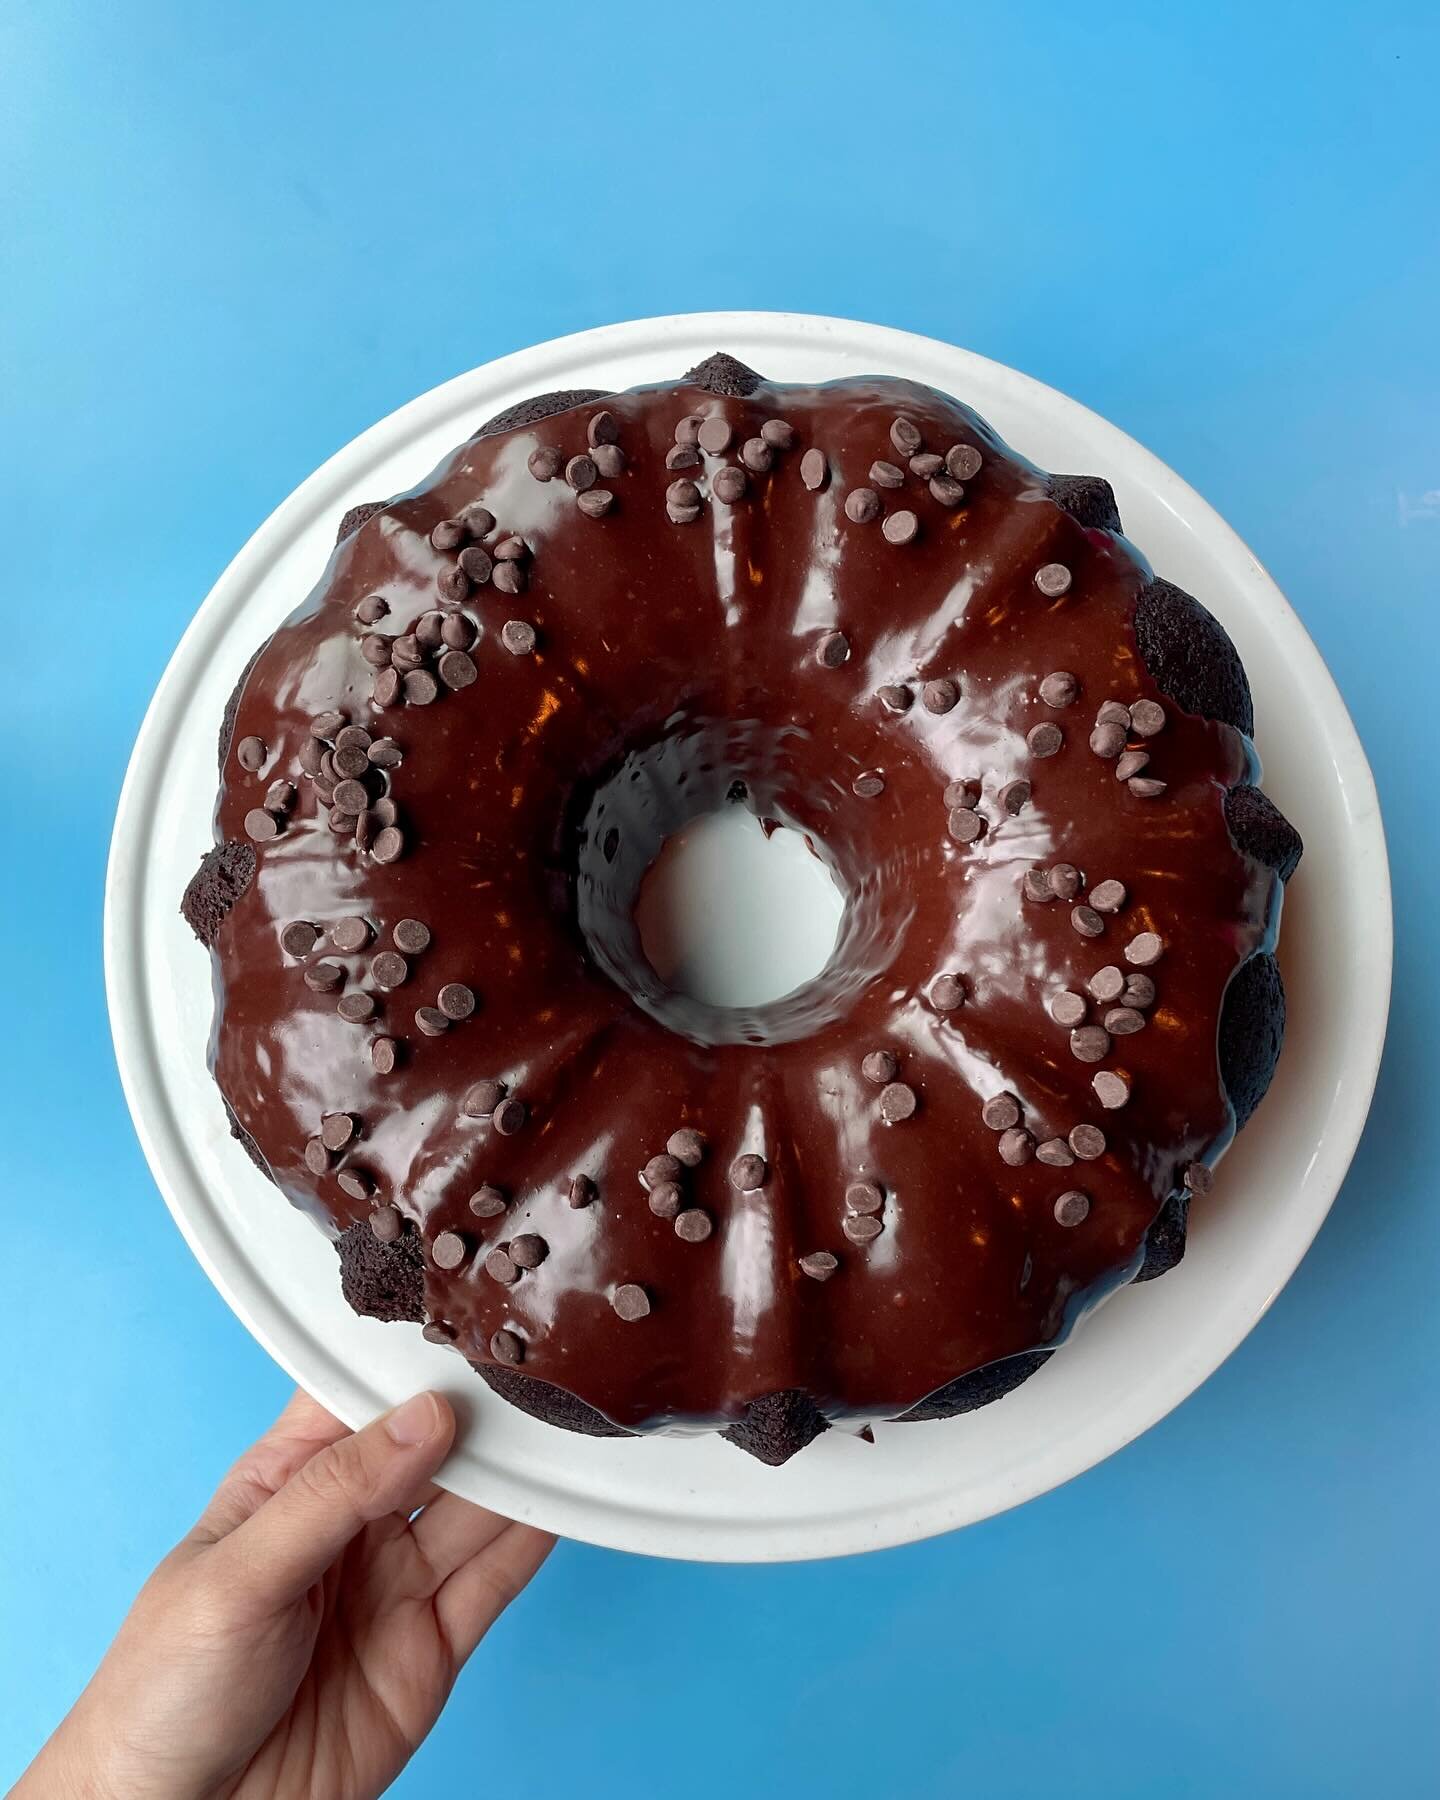 ☘️&nbsp;Irish Soda Bread and a Guinness Stout Chocolate Bundt for St. Patrick&rsquo;s Day ☘️

✨ IRISH SODA BREAD: Moist and crumbly, dotted with whisky soaked currants and raisins. Topped with pearl sugar for a little extra sweet crunch. Served with 